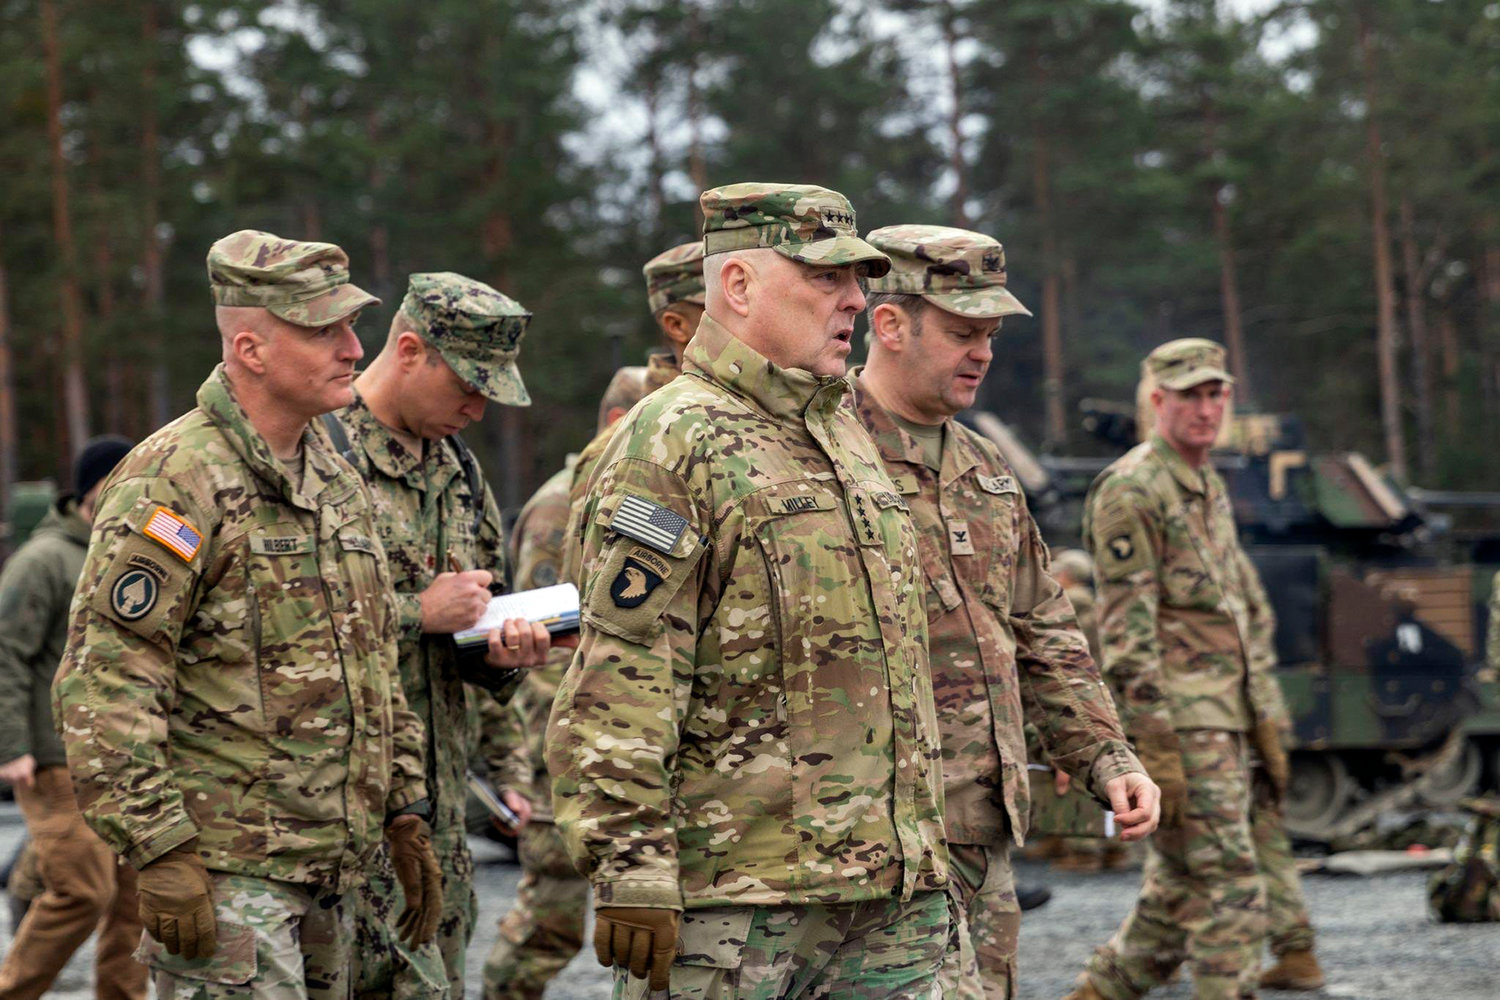 In this image provided by the U.S. Army, U.S. Chairman of the Joint Chiefs of Staff Gen. Mark Milley meets with U.S. Army leaders responsible for the collective training of Ukrainians at Grafenwoehr Training Area, Grafenwoehr, Germany, on Monday, Jan. 16. At left is Brig. Gen. Joseph E. Hilbert, who is the commanding general for the 7th Army Training Command. Milley visited the training site in Germany for Ukrainian forces and met with troops and commanders. The Grafenwoehr Training Area includes a contingent of Army National Guard soldiers typically stationed in Utica.